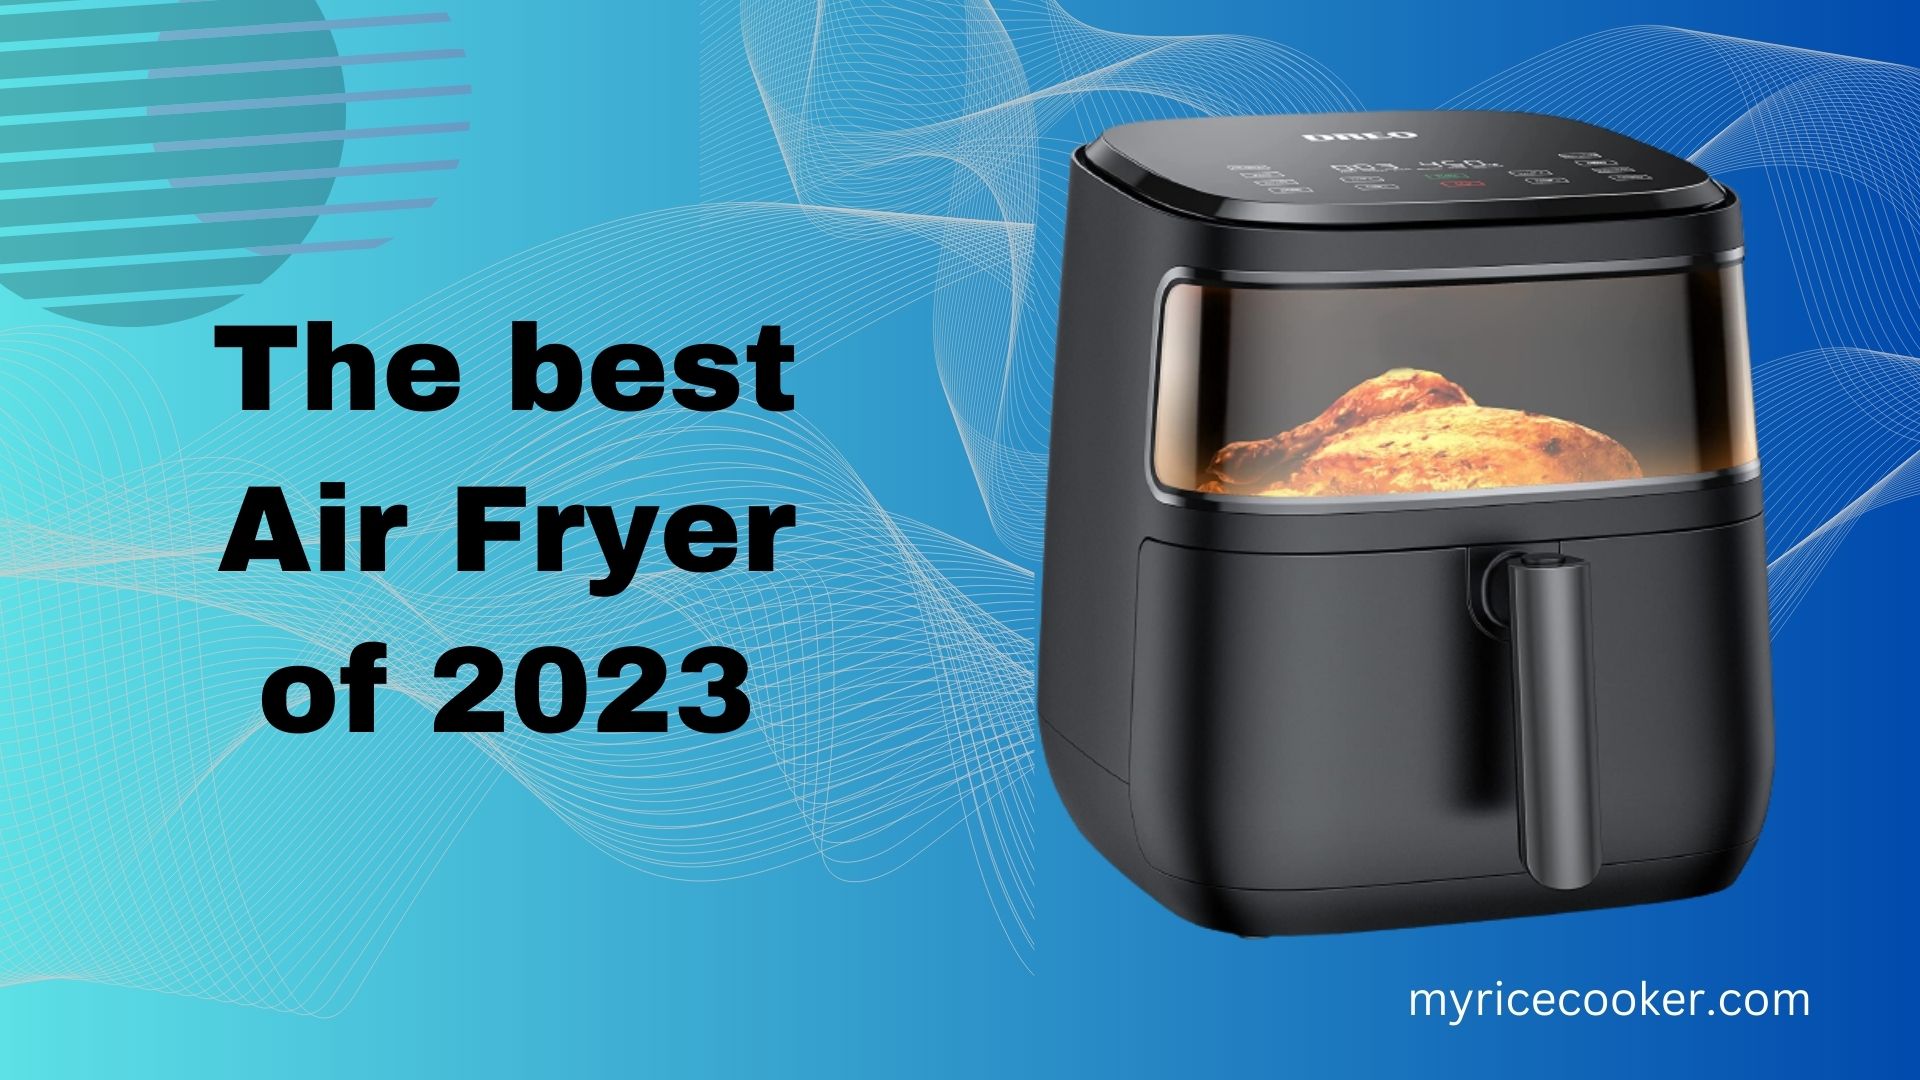 The best Air Fryer of 2023